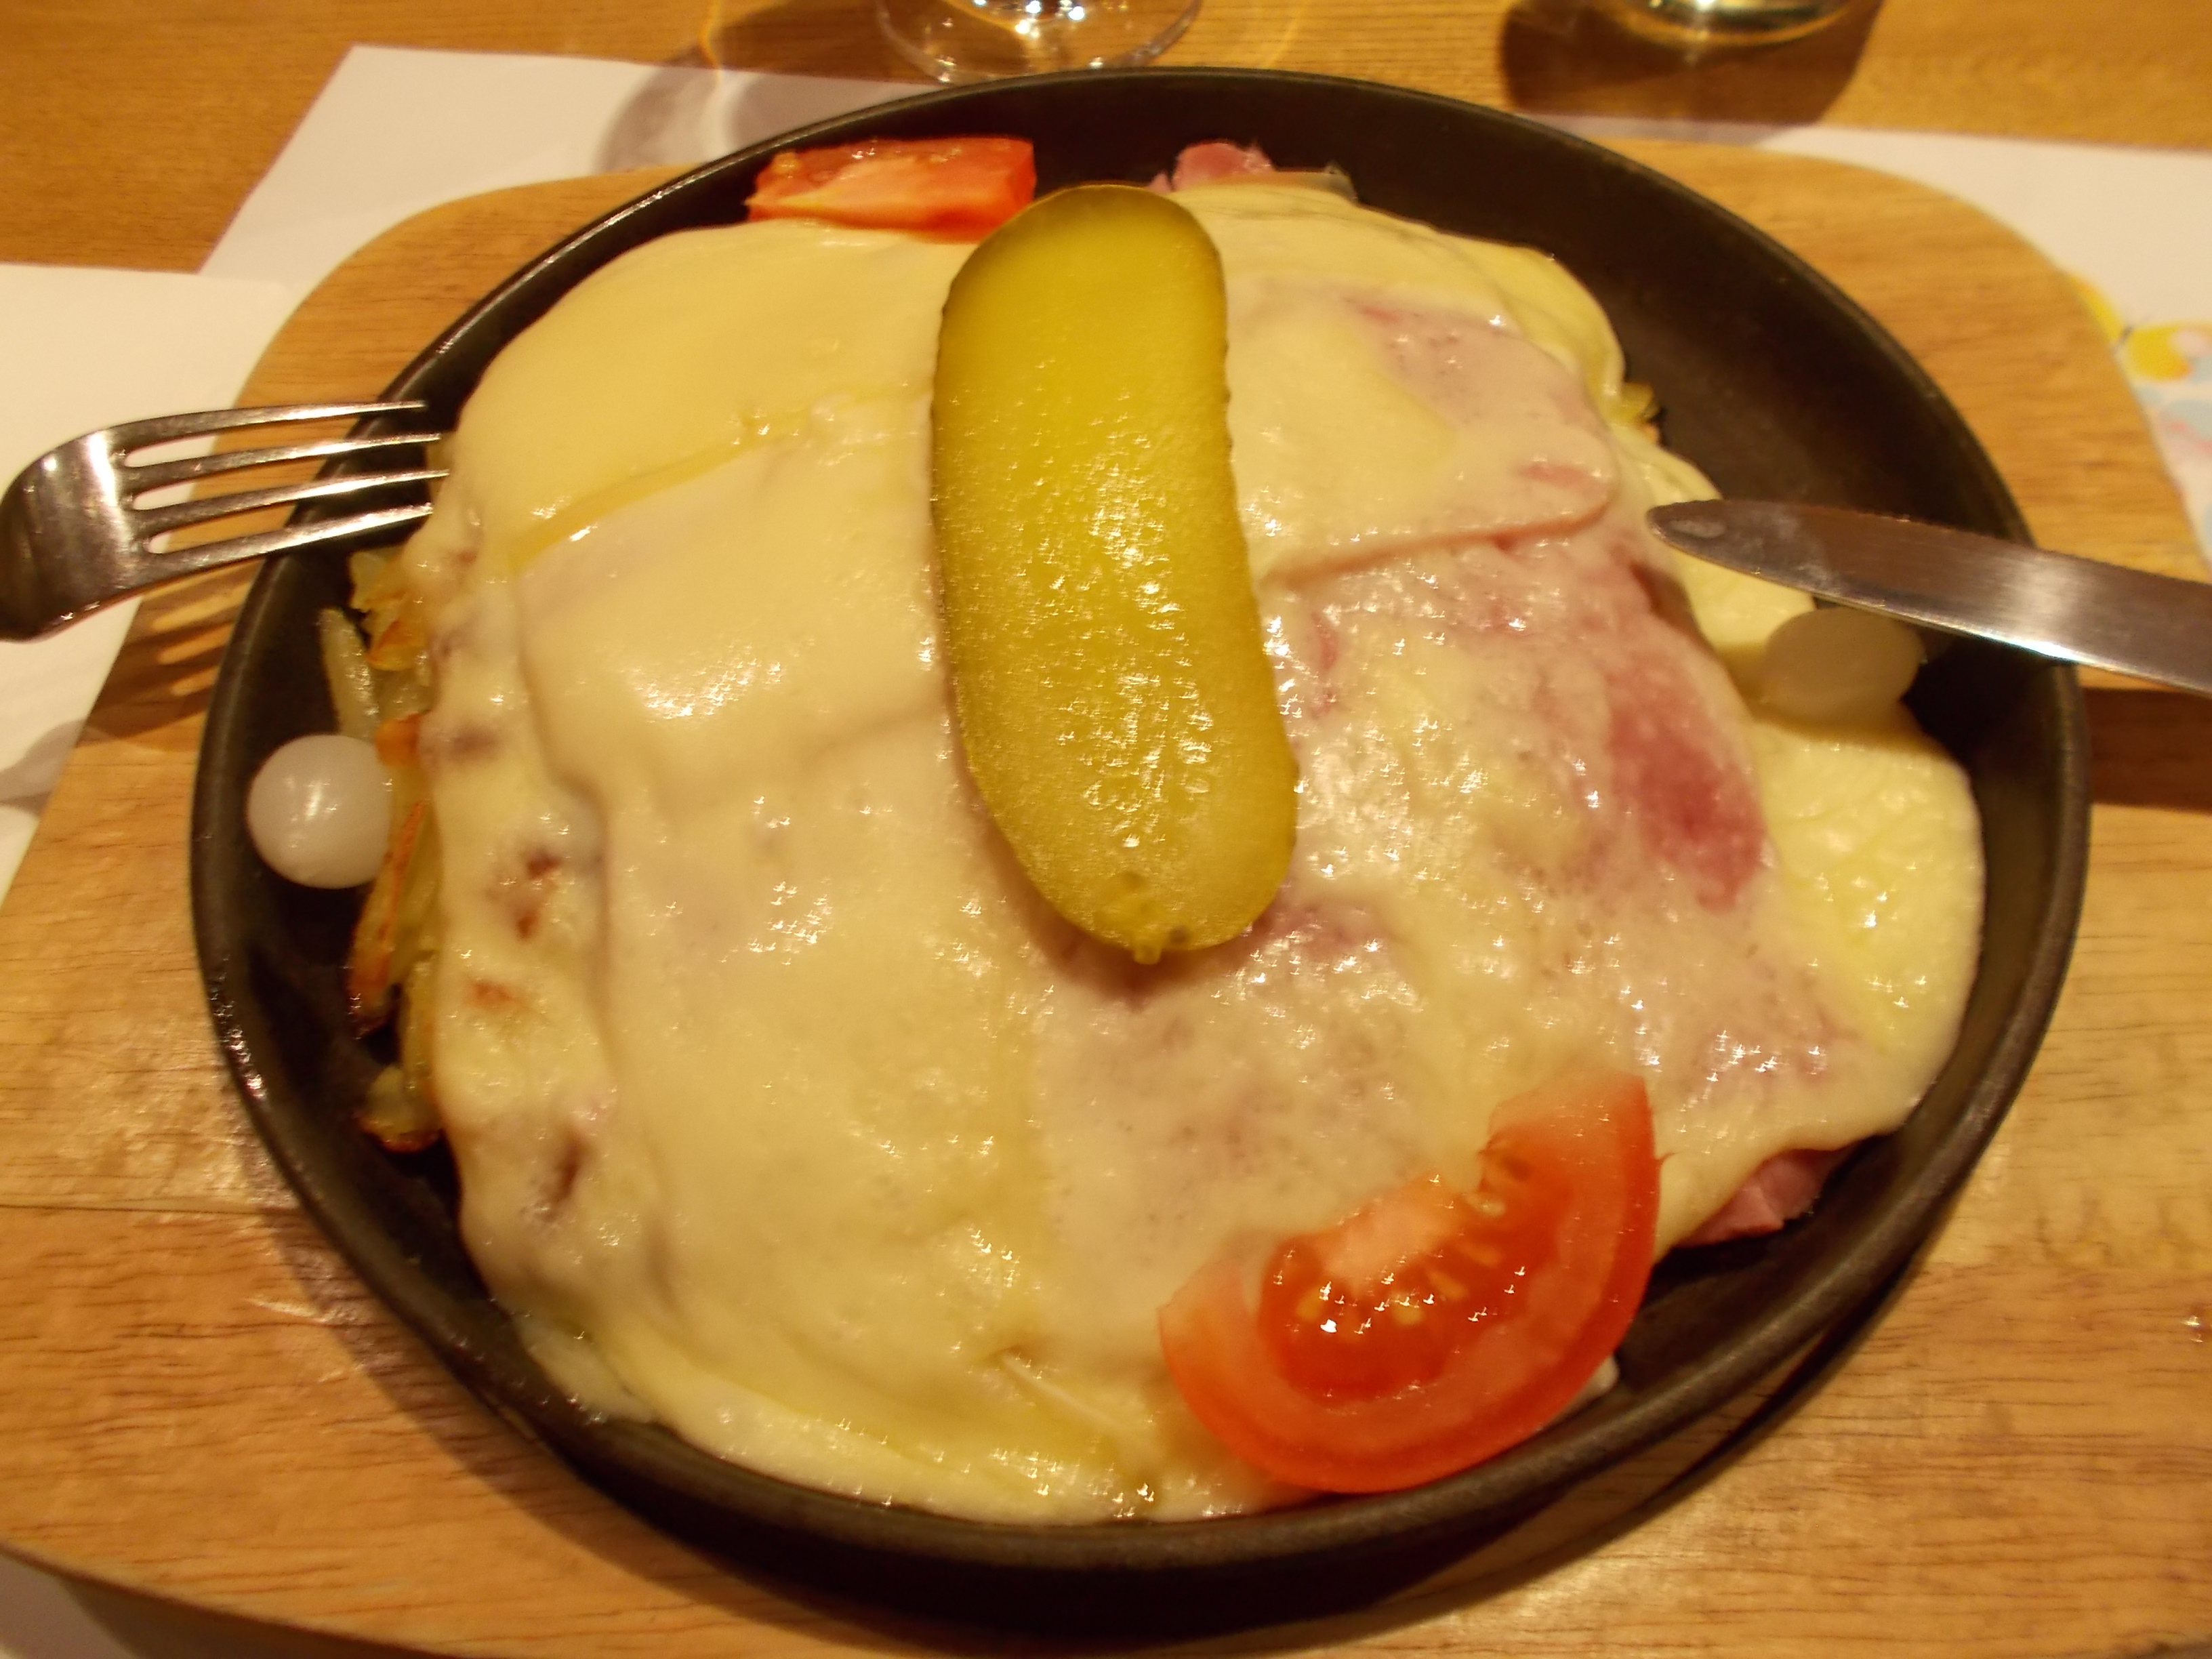 A cast iron plate filled with rösti, cheese, fresh tomato, and a pickle.